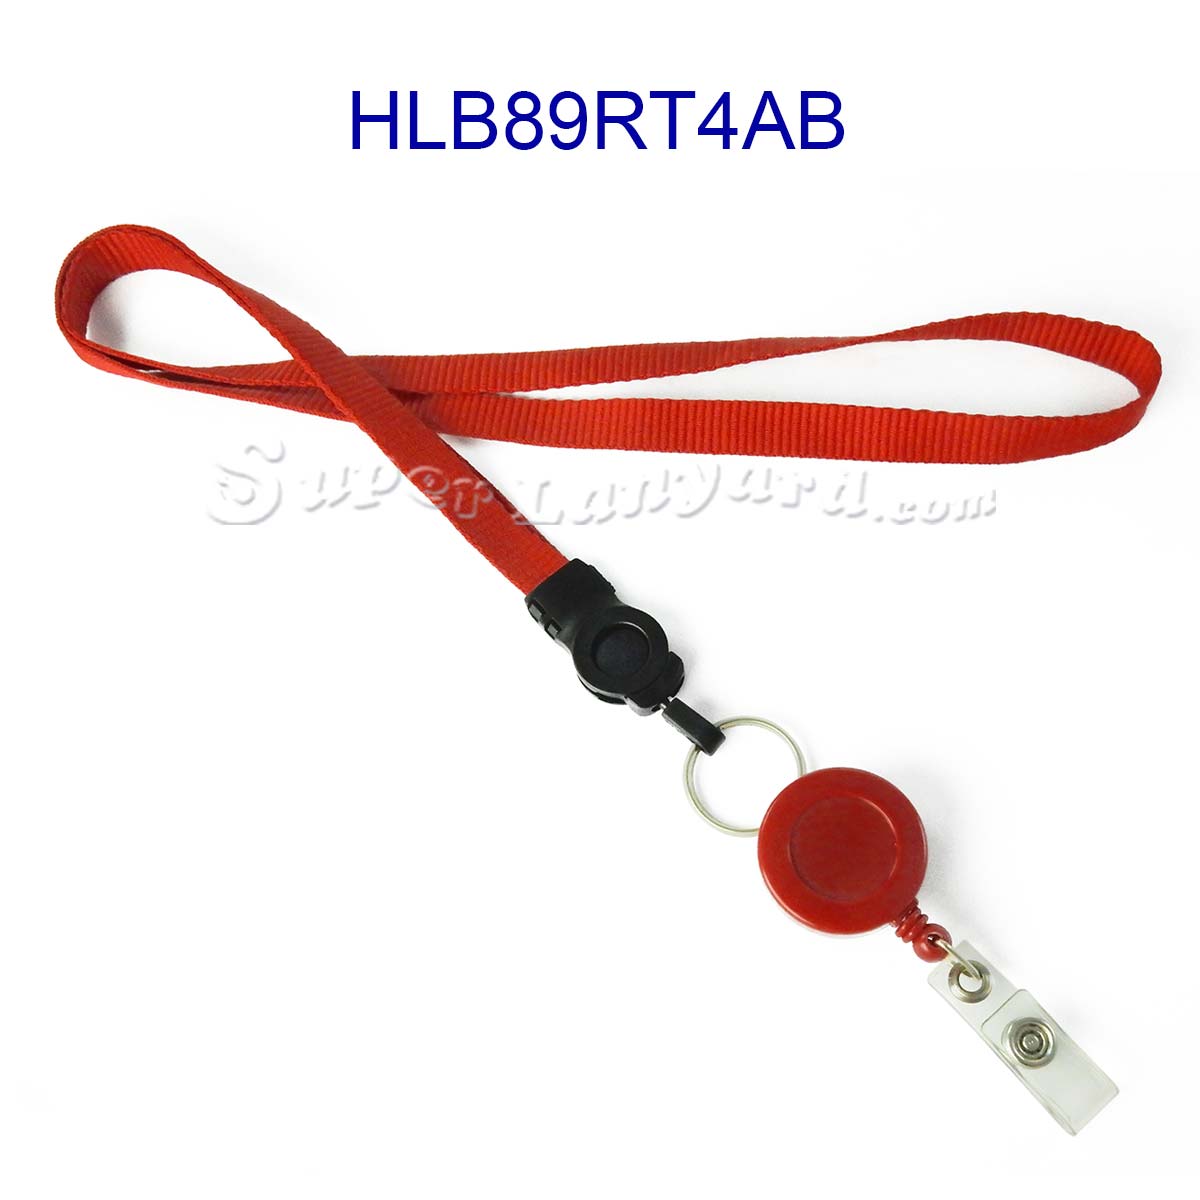 Retractable Badge Holder Lanyard  12mm safety release buckle lanyard  attached keyring with ID badge reel and horizontal 4x3 badge  holder-HLB89RT4AB